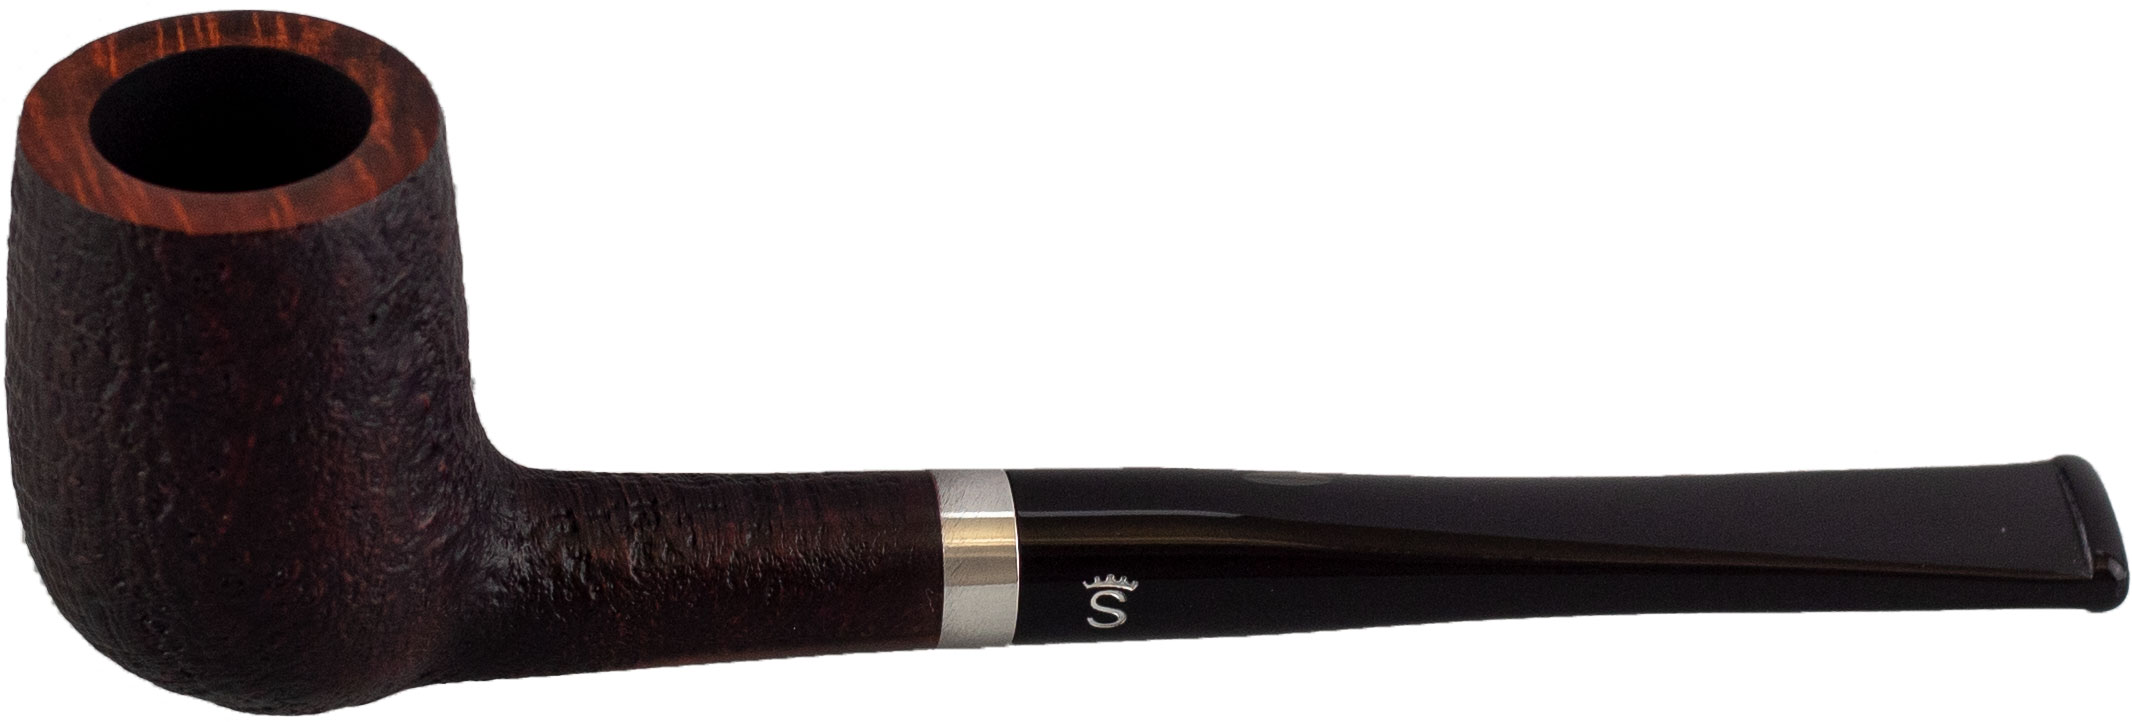 Stanwell Relief blac (1)